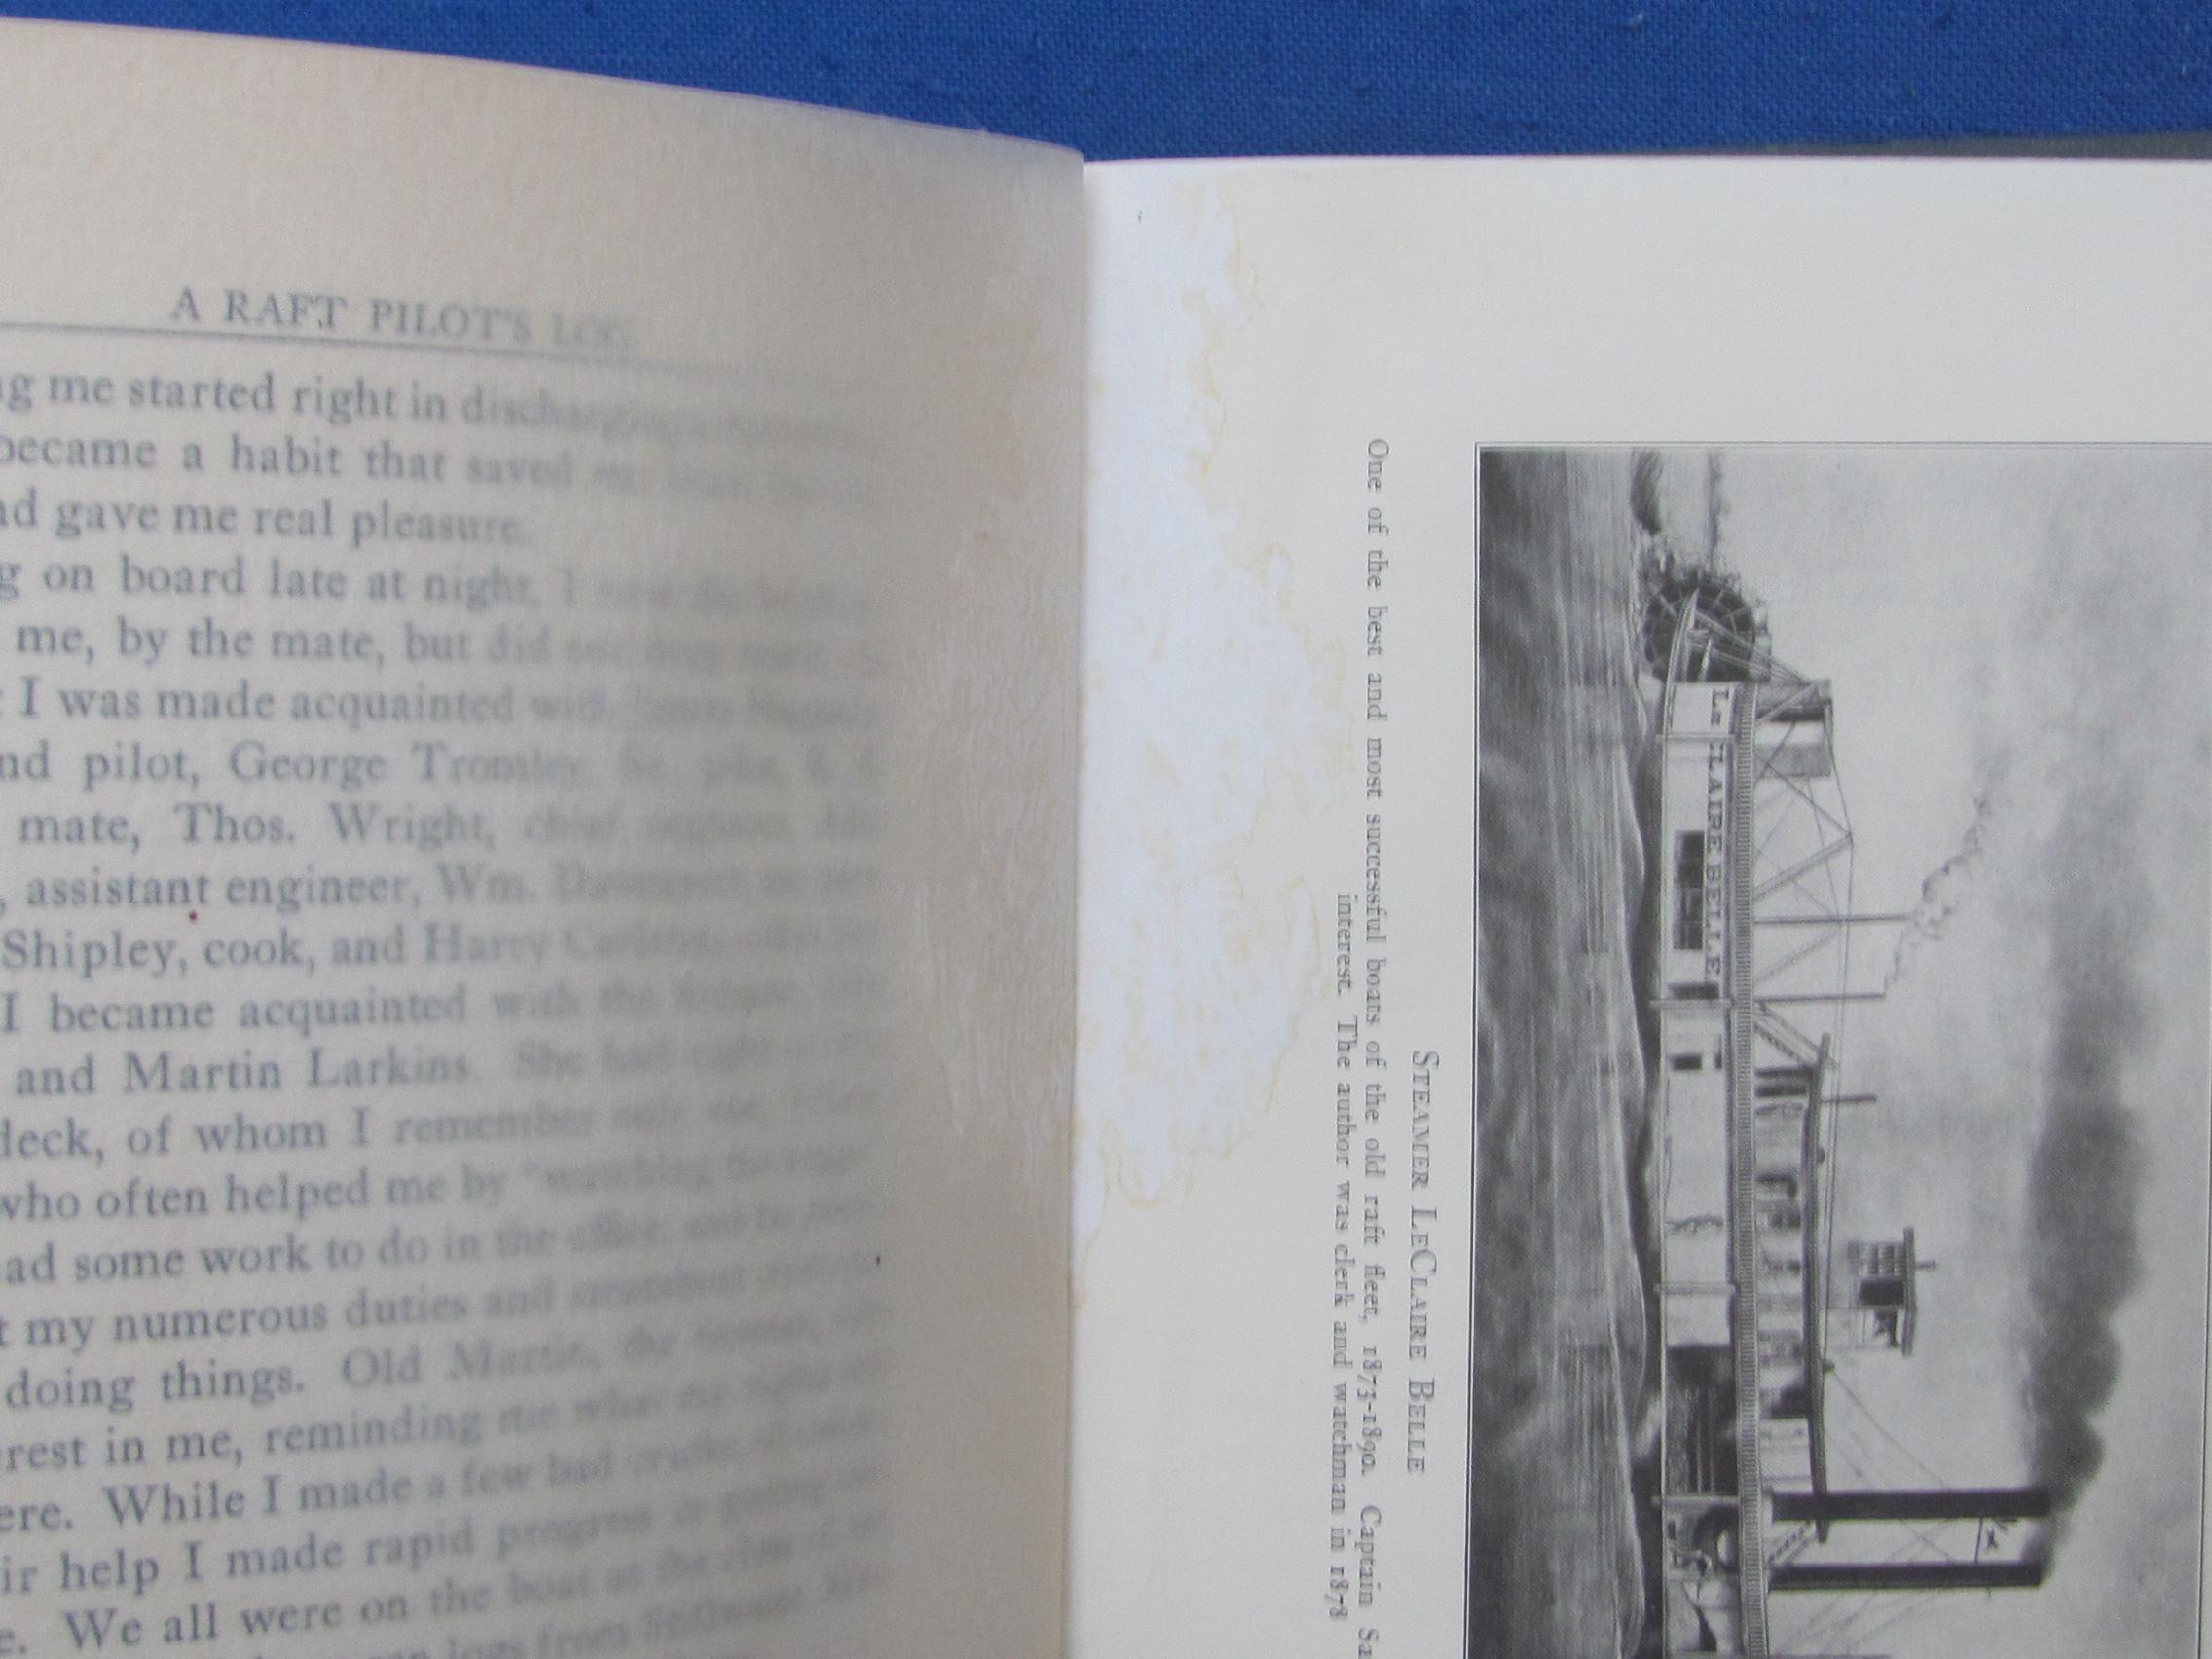 Autographed 1930 Hardcover Book “A Raft Pilot's Log – A History of Rafting Industry on the Upper Mis